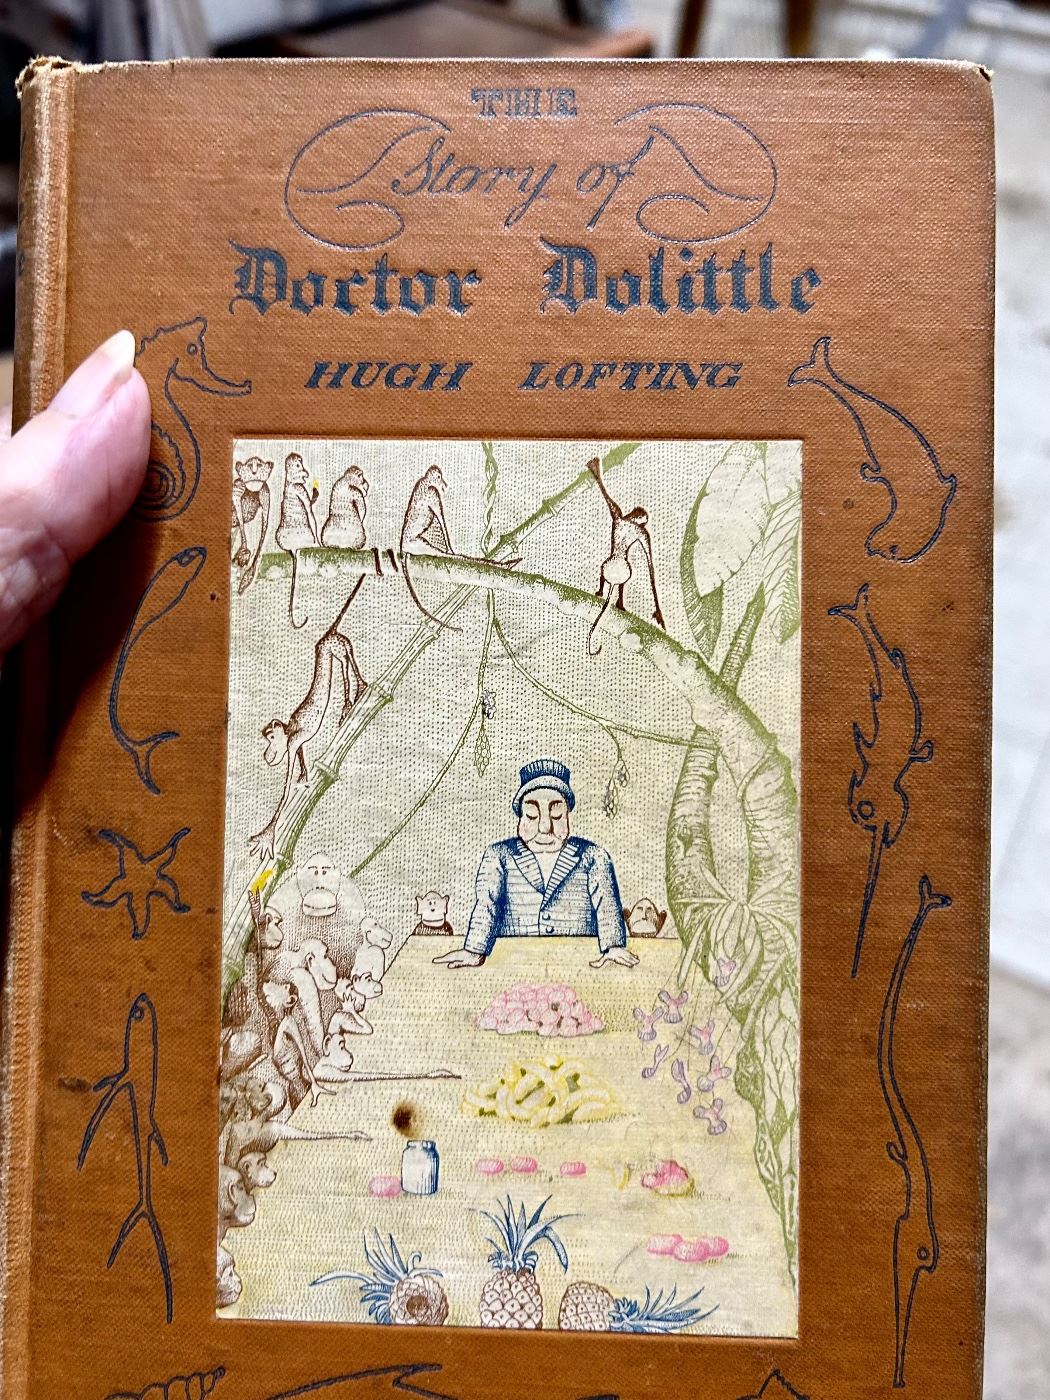 Signed by Hugh Lofting not a first edition 